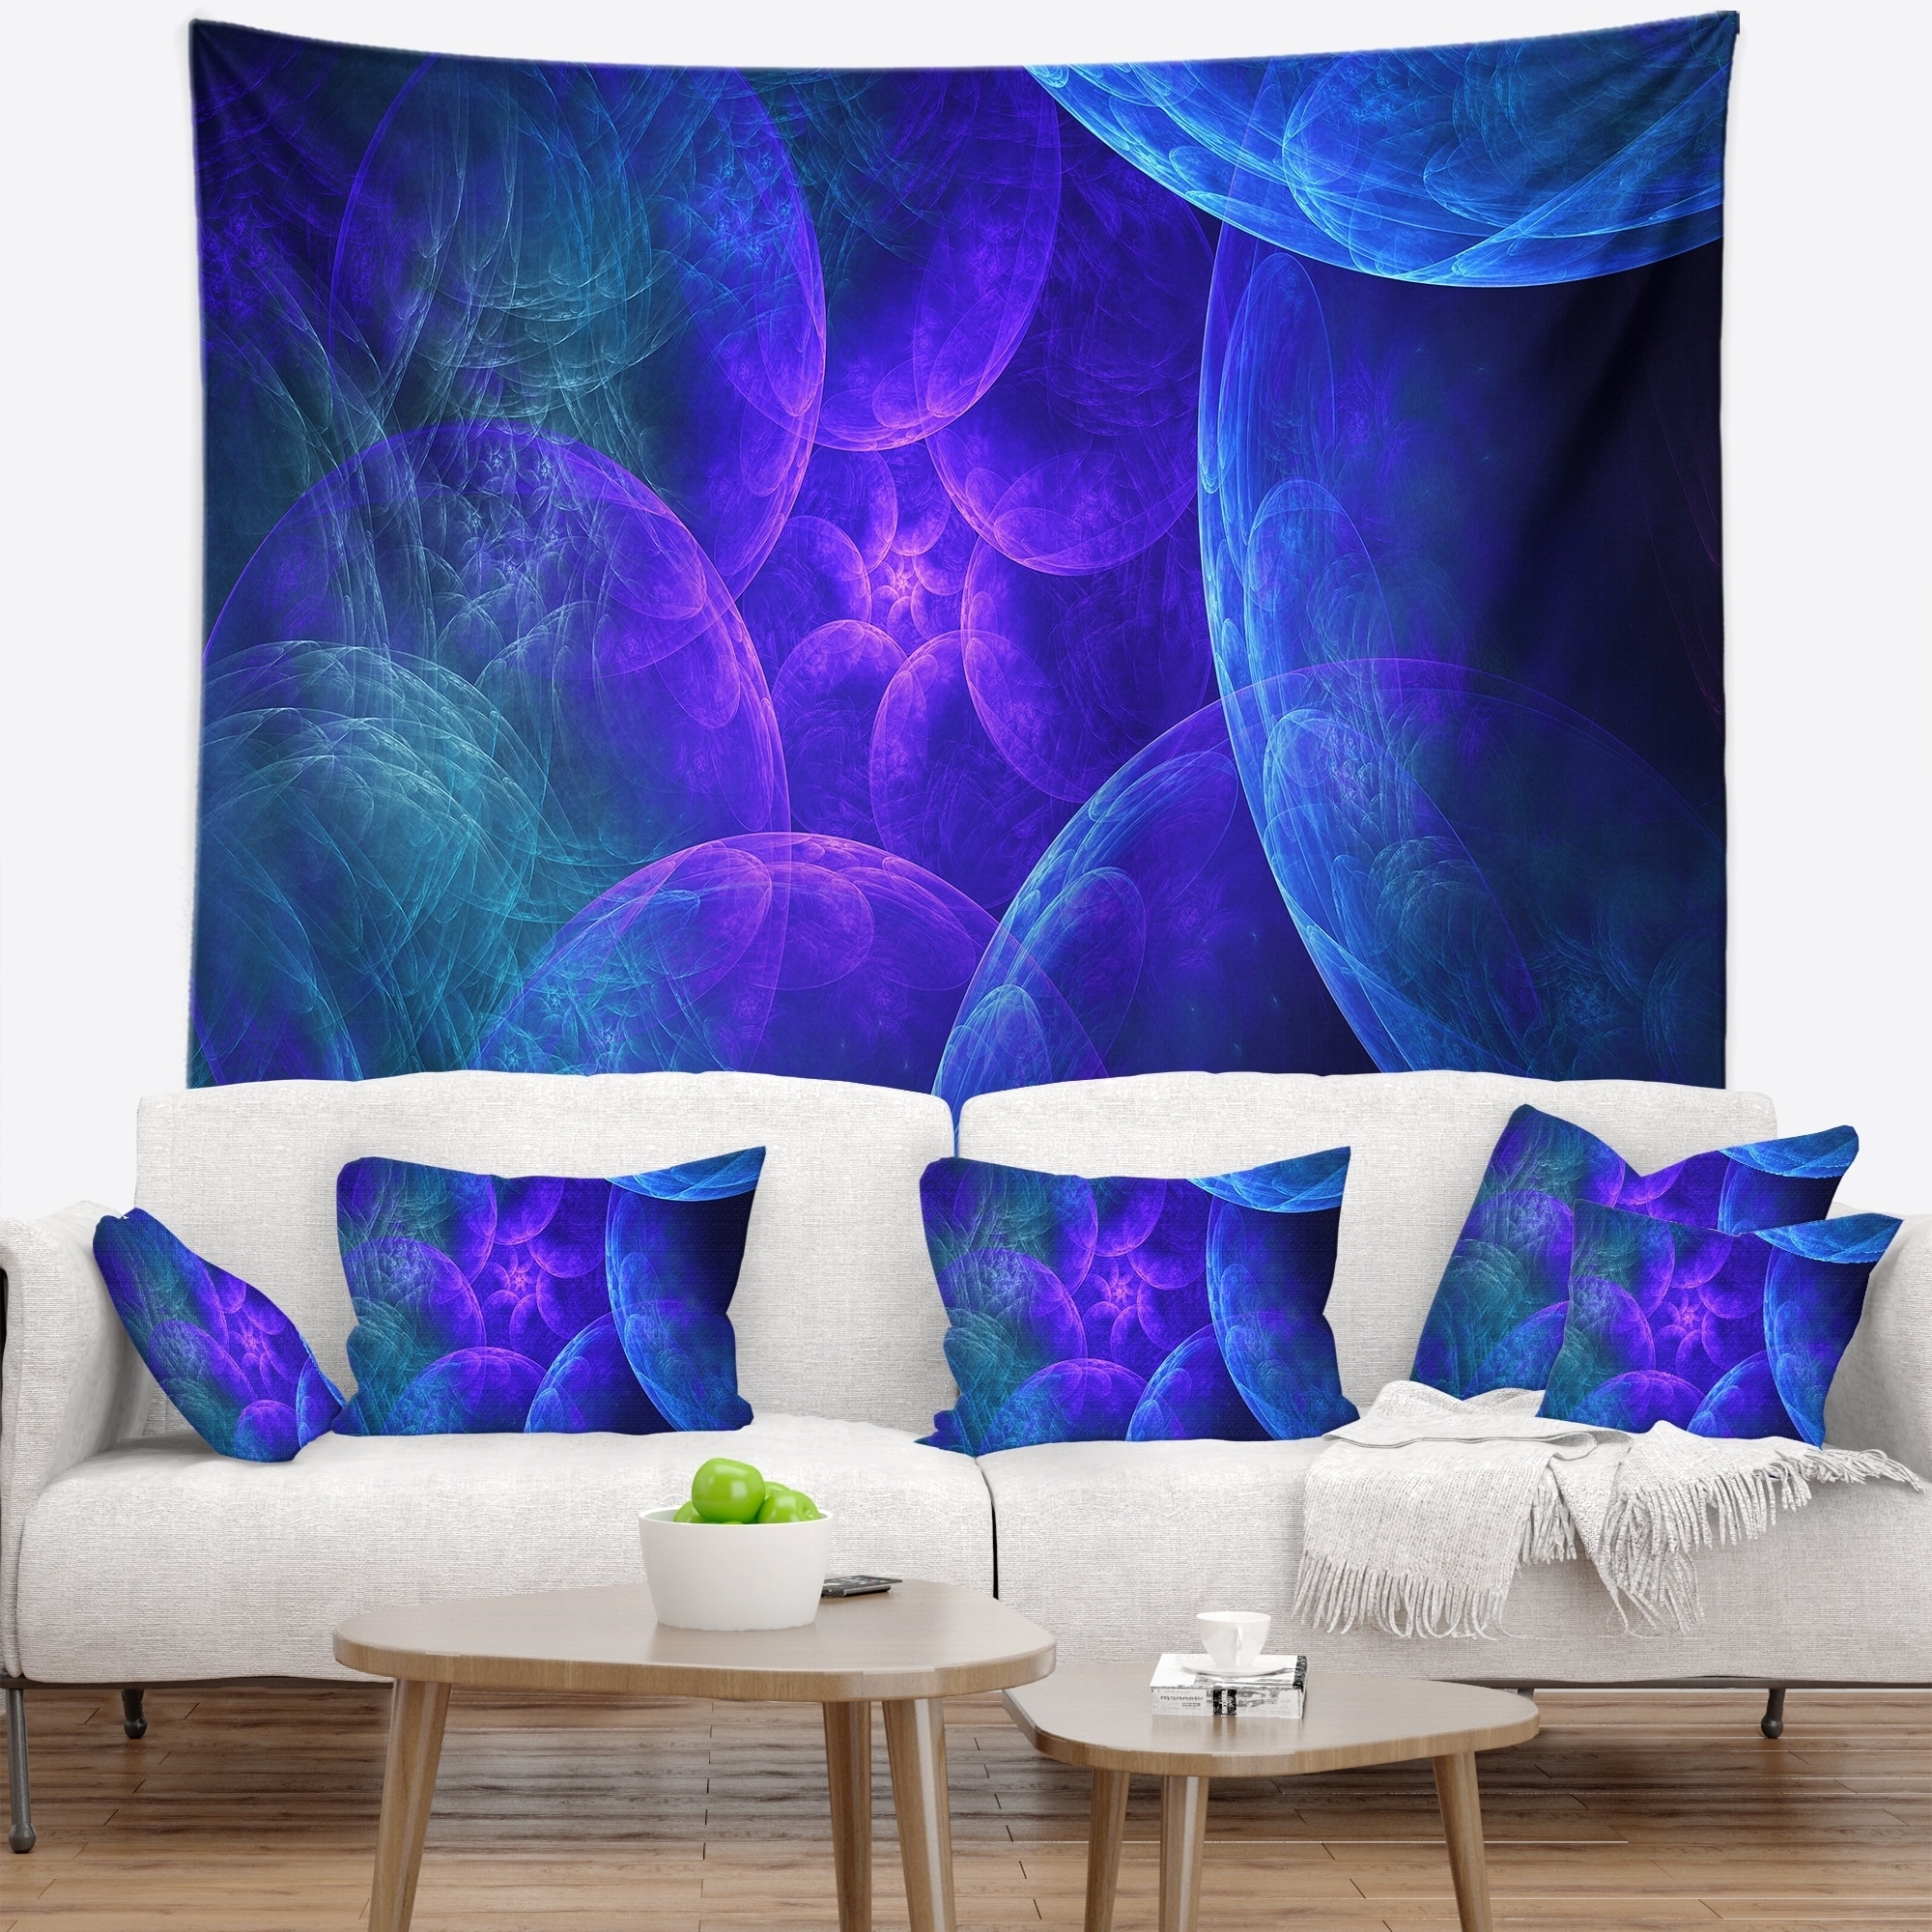 Designart 'Biblical Sky with Blue Clouds' Abstract Wall Tapestry